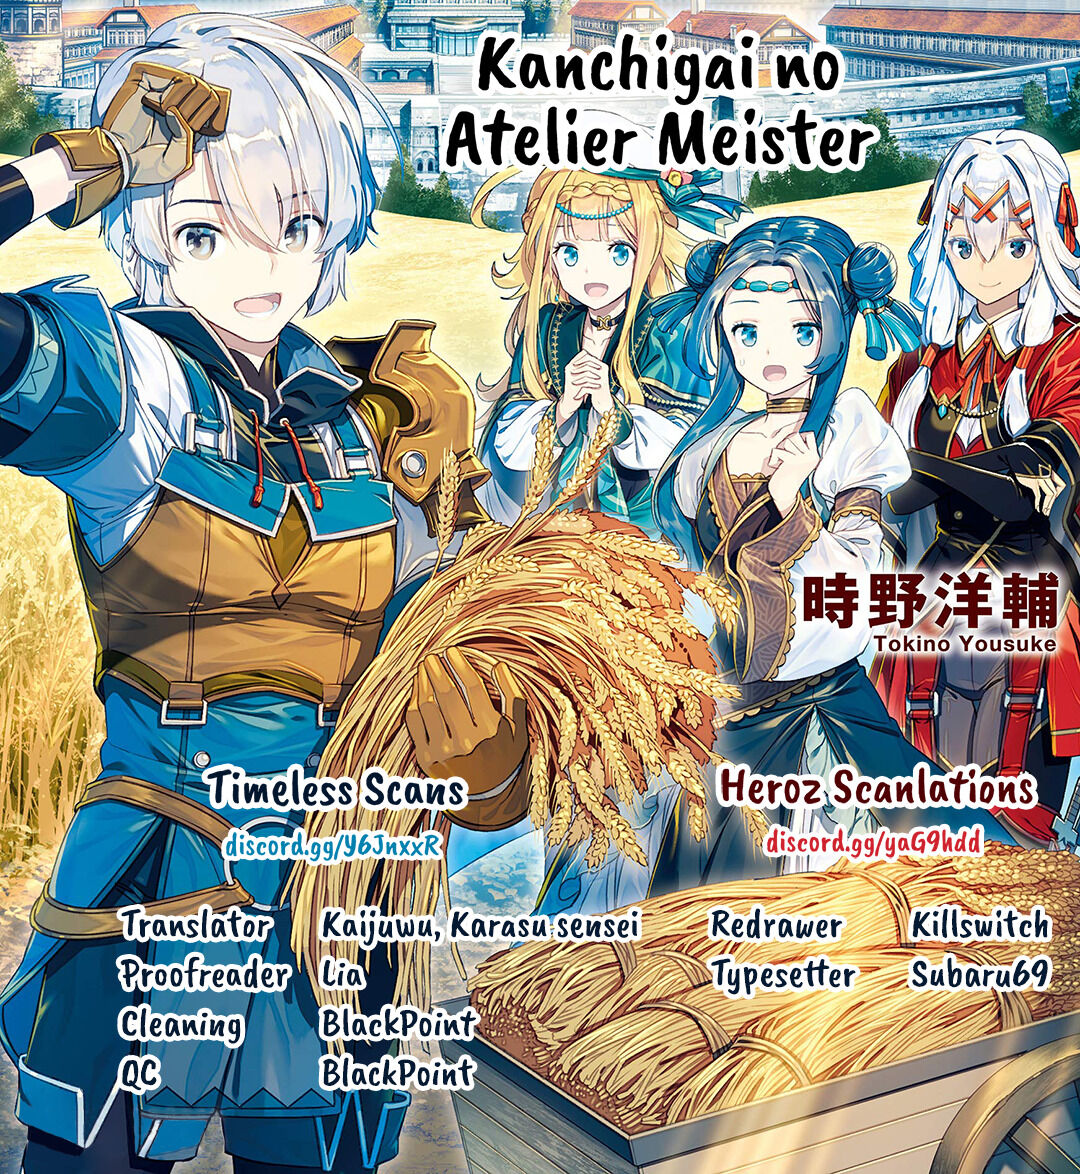 Kanchigai no Atelier Master - Chapter 7473 - A New Atelier Meister - Image 1